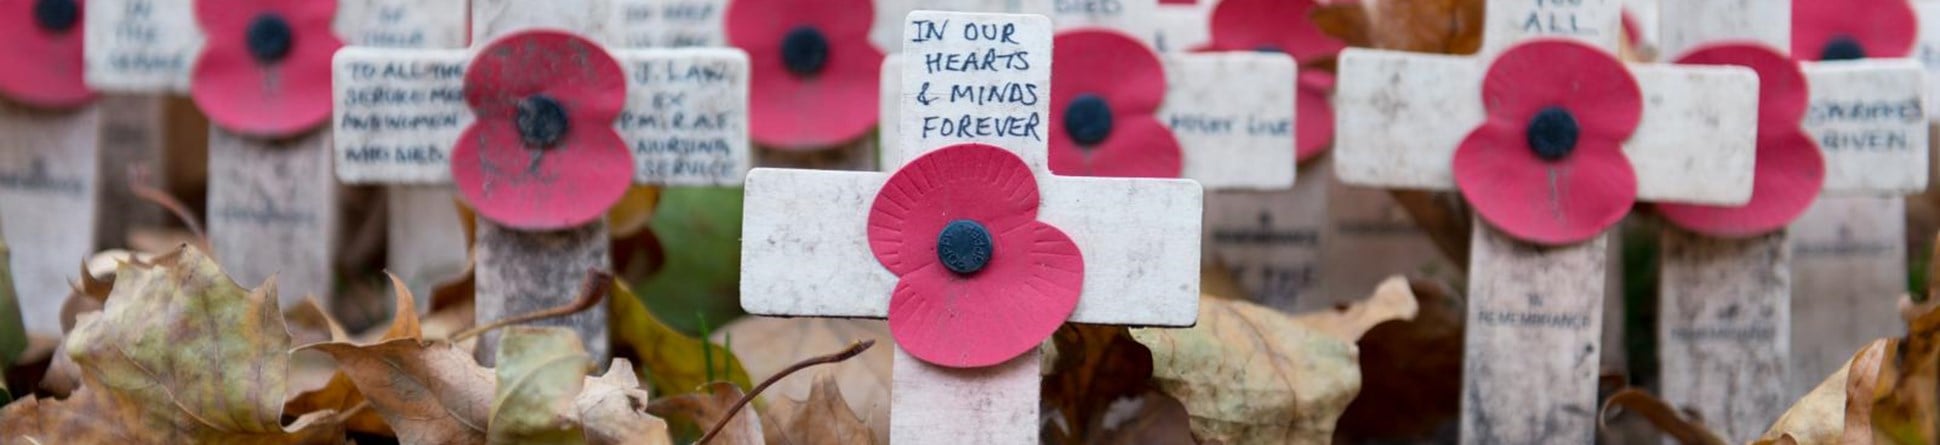 Hundreds of weathered remembrance crosses, each with a central poppy and hand-written message. Fallen autumn leaves are clustered in the foreground and visible amongst the ranks of the crosses.